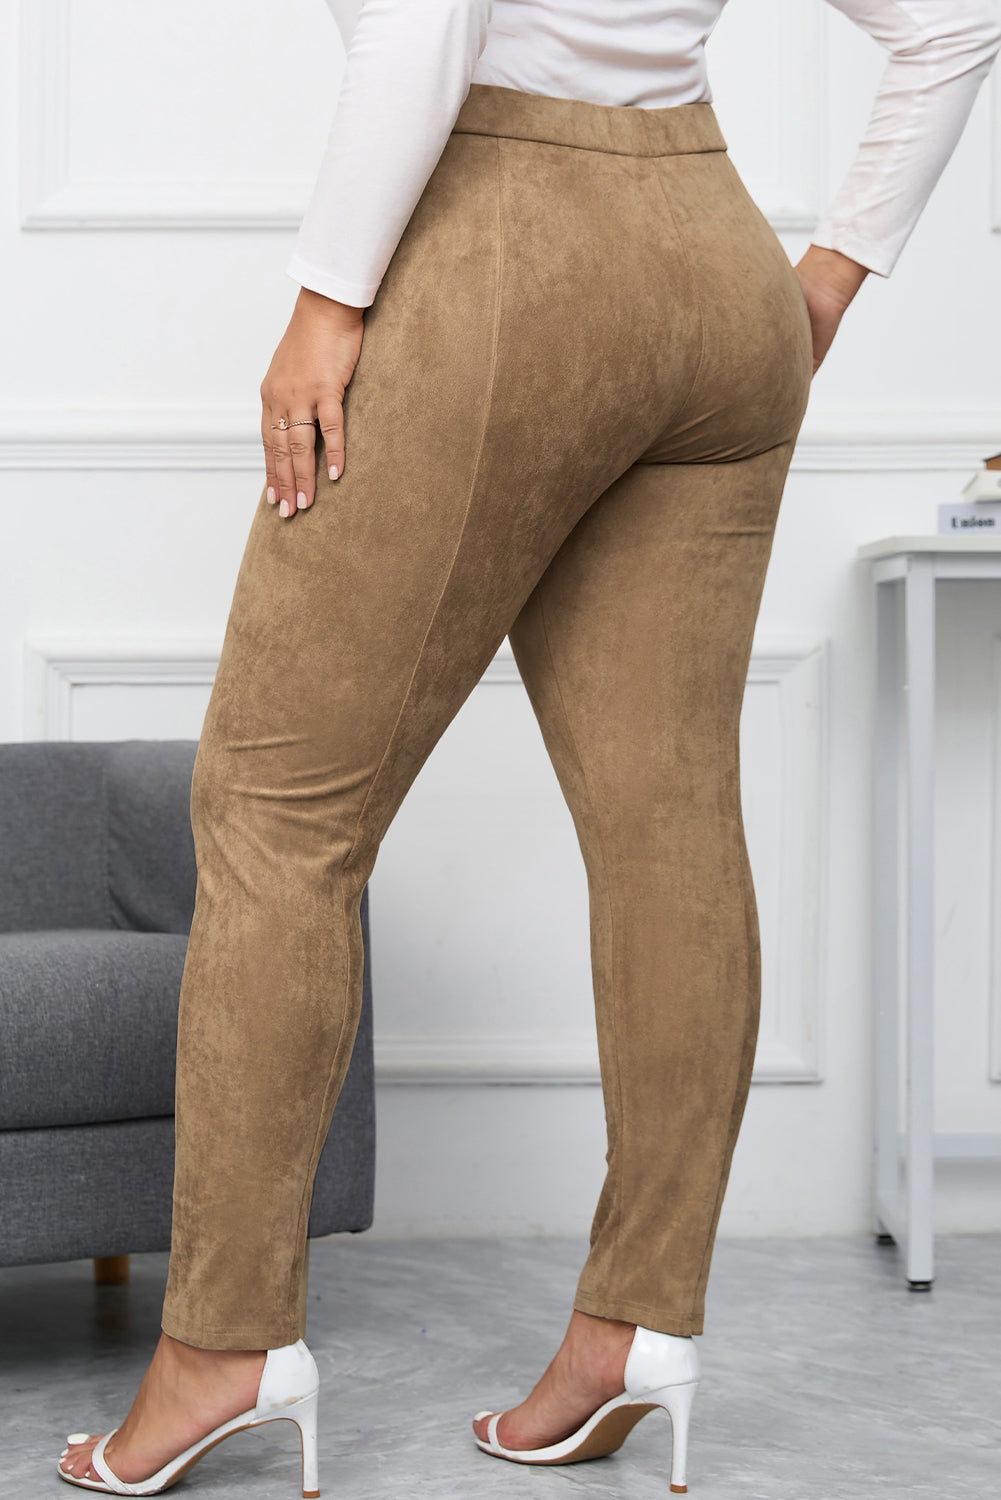 Camel High Rise Faux Suede Skinny Pants